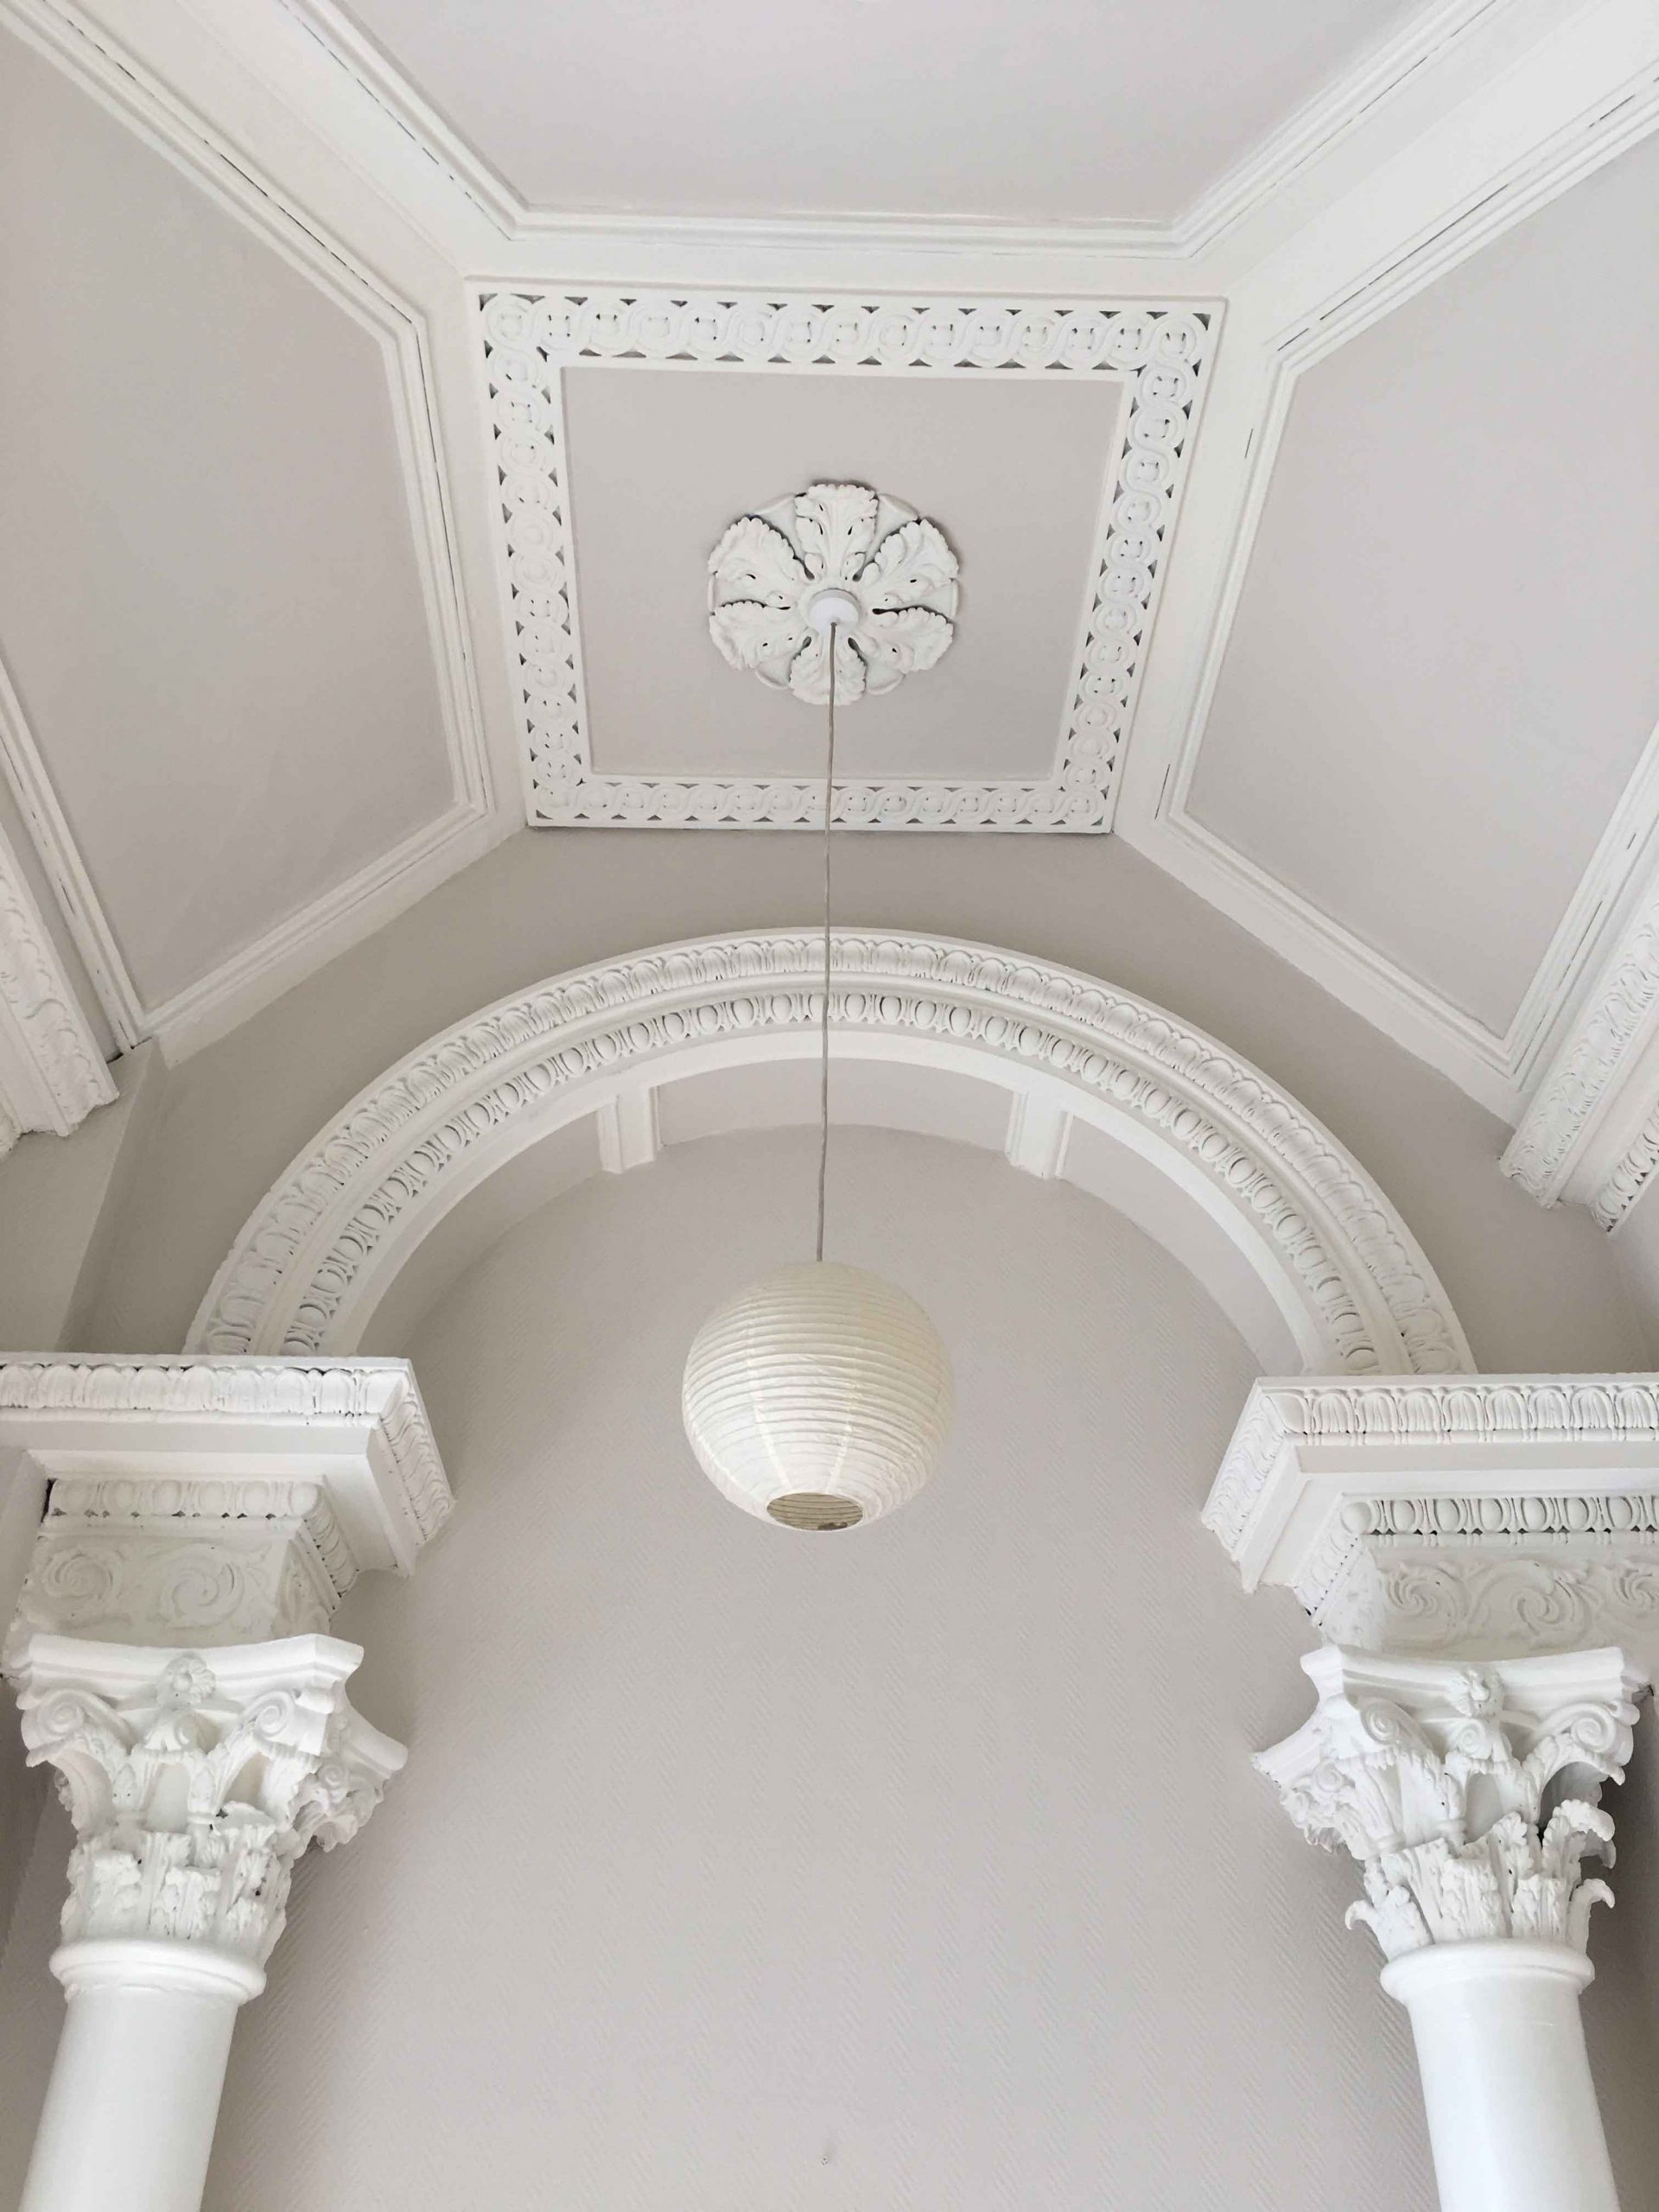 Ceiling and cornice painting and restoration experts in period houses by Impressions Painters and Decorators in Dublin